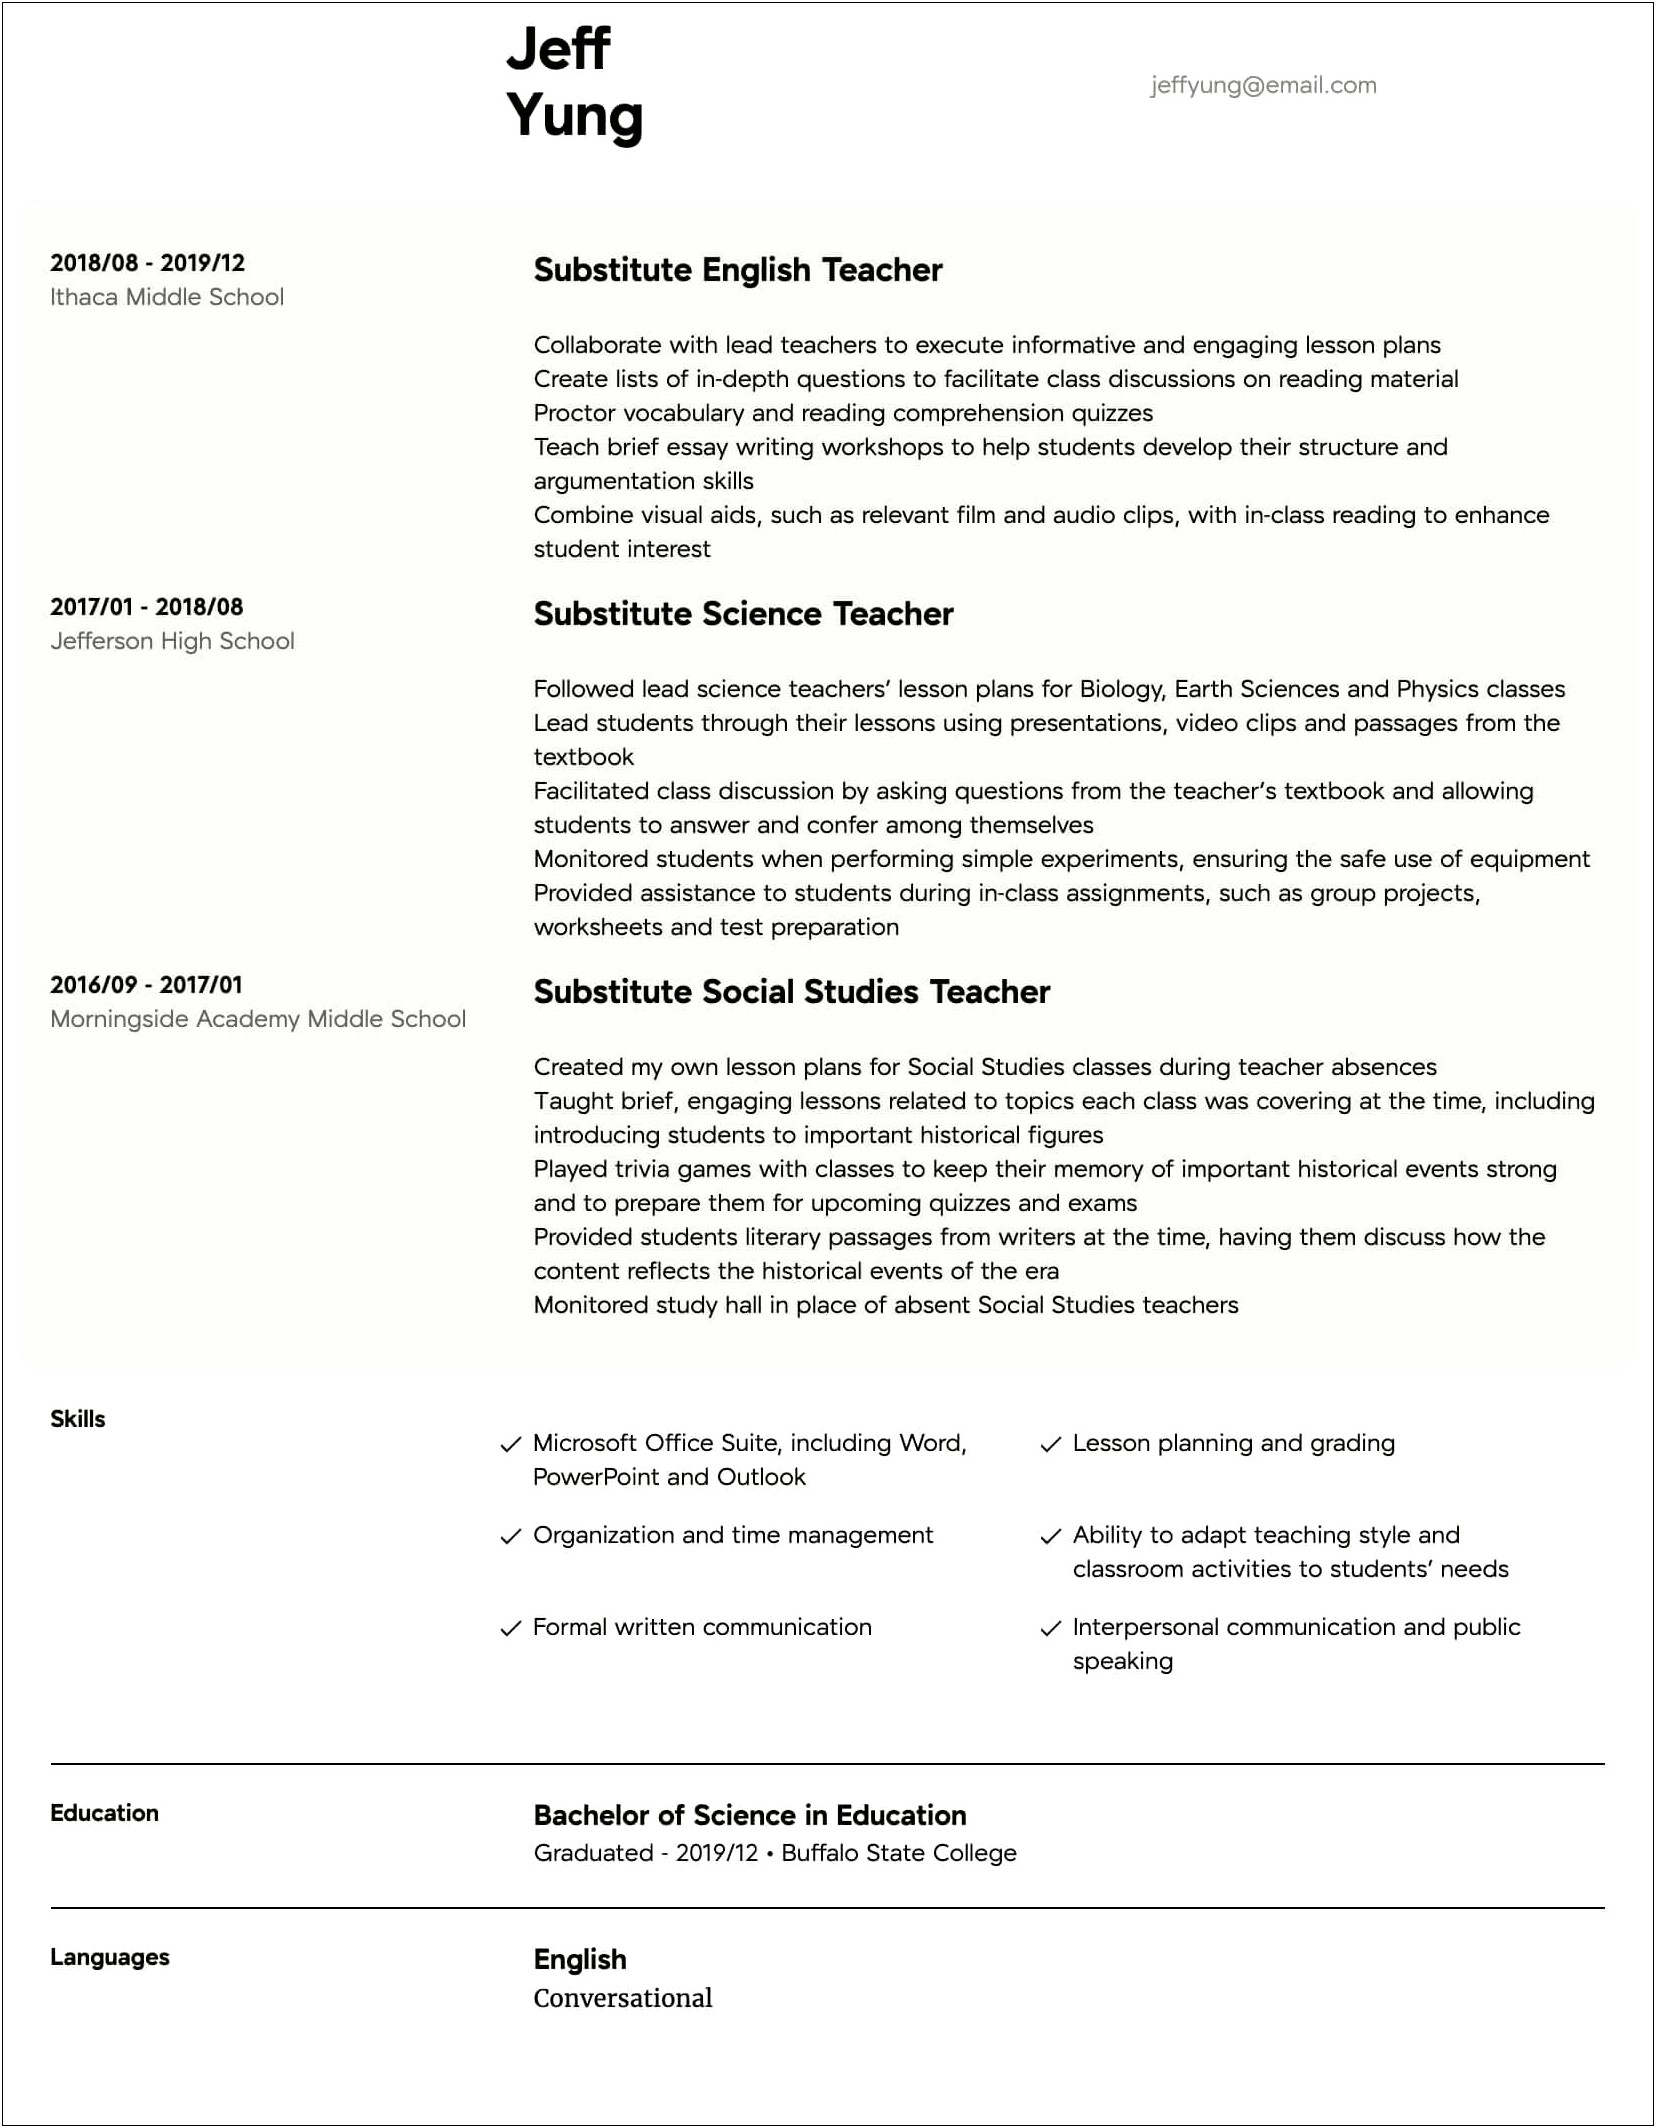 Responsibilities And Skills Of A Teacher On Resume